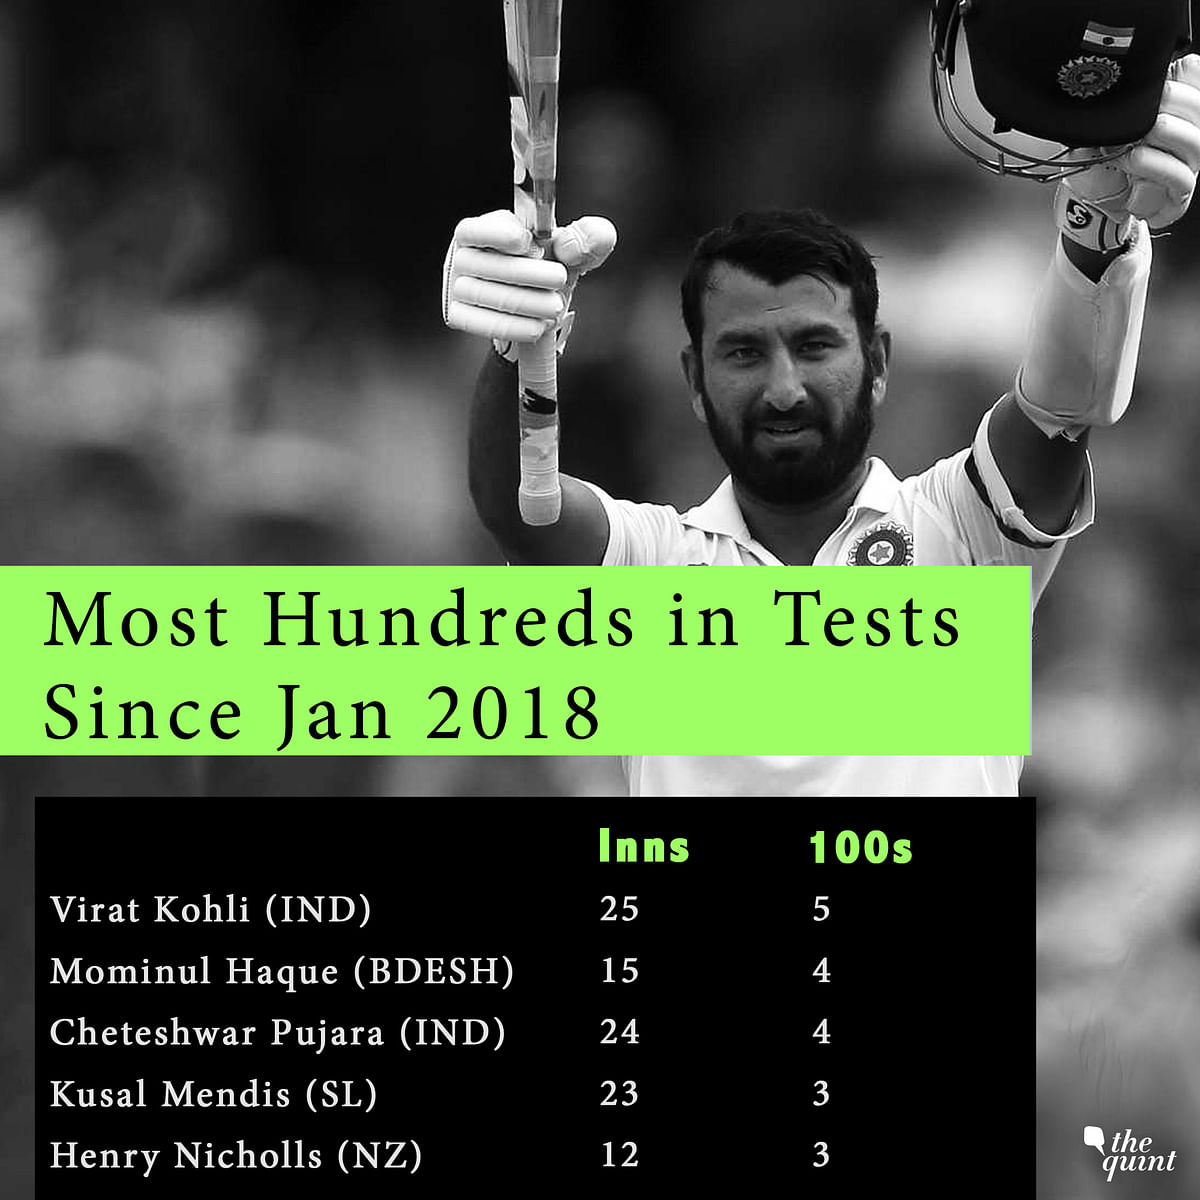 Dropped at Sydney four years ago, Pujara has made himself ‘undroppable’ through a golden summer Down Under.